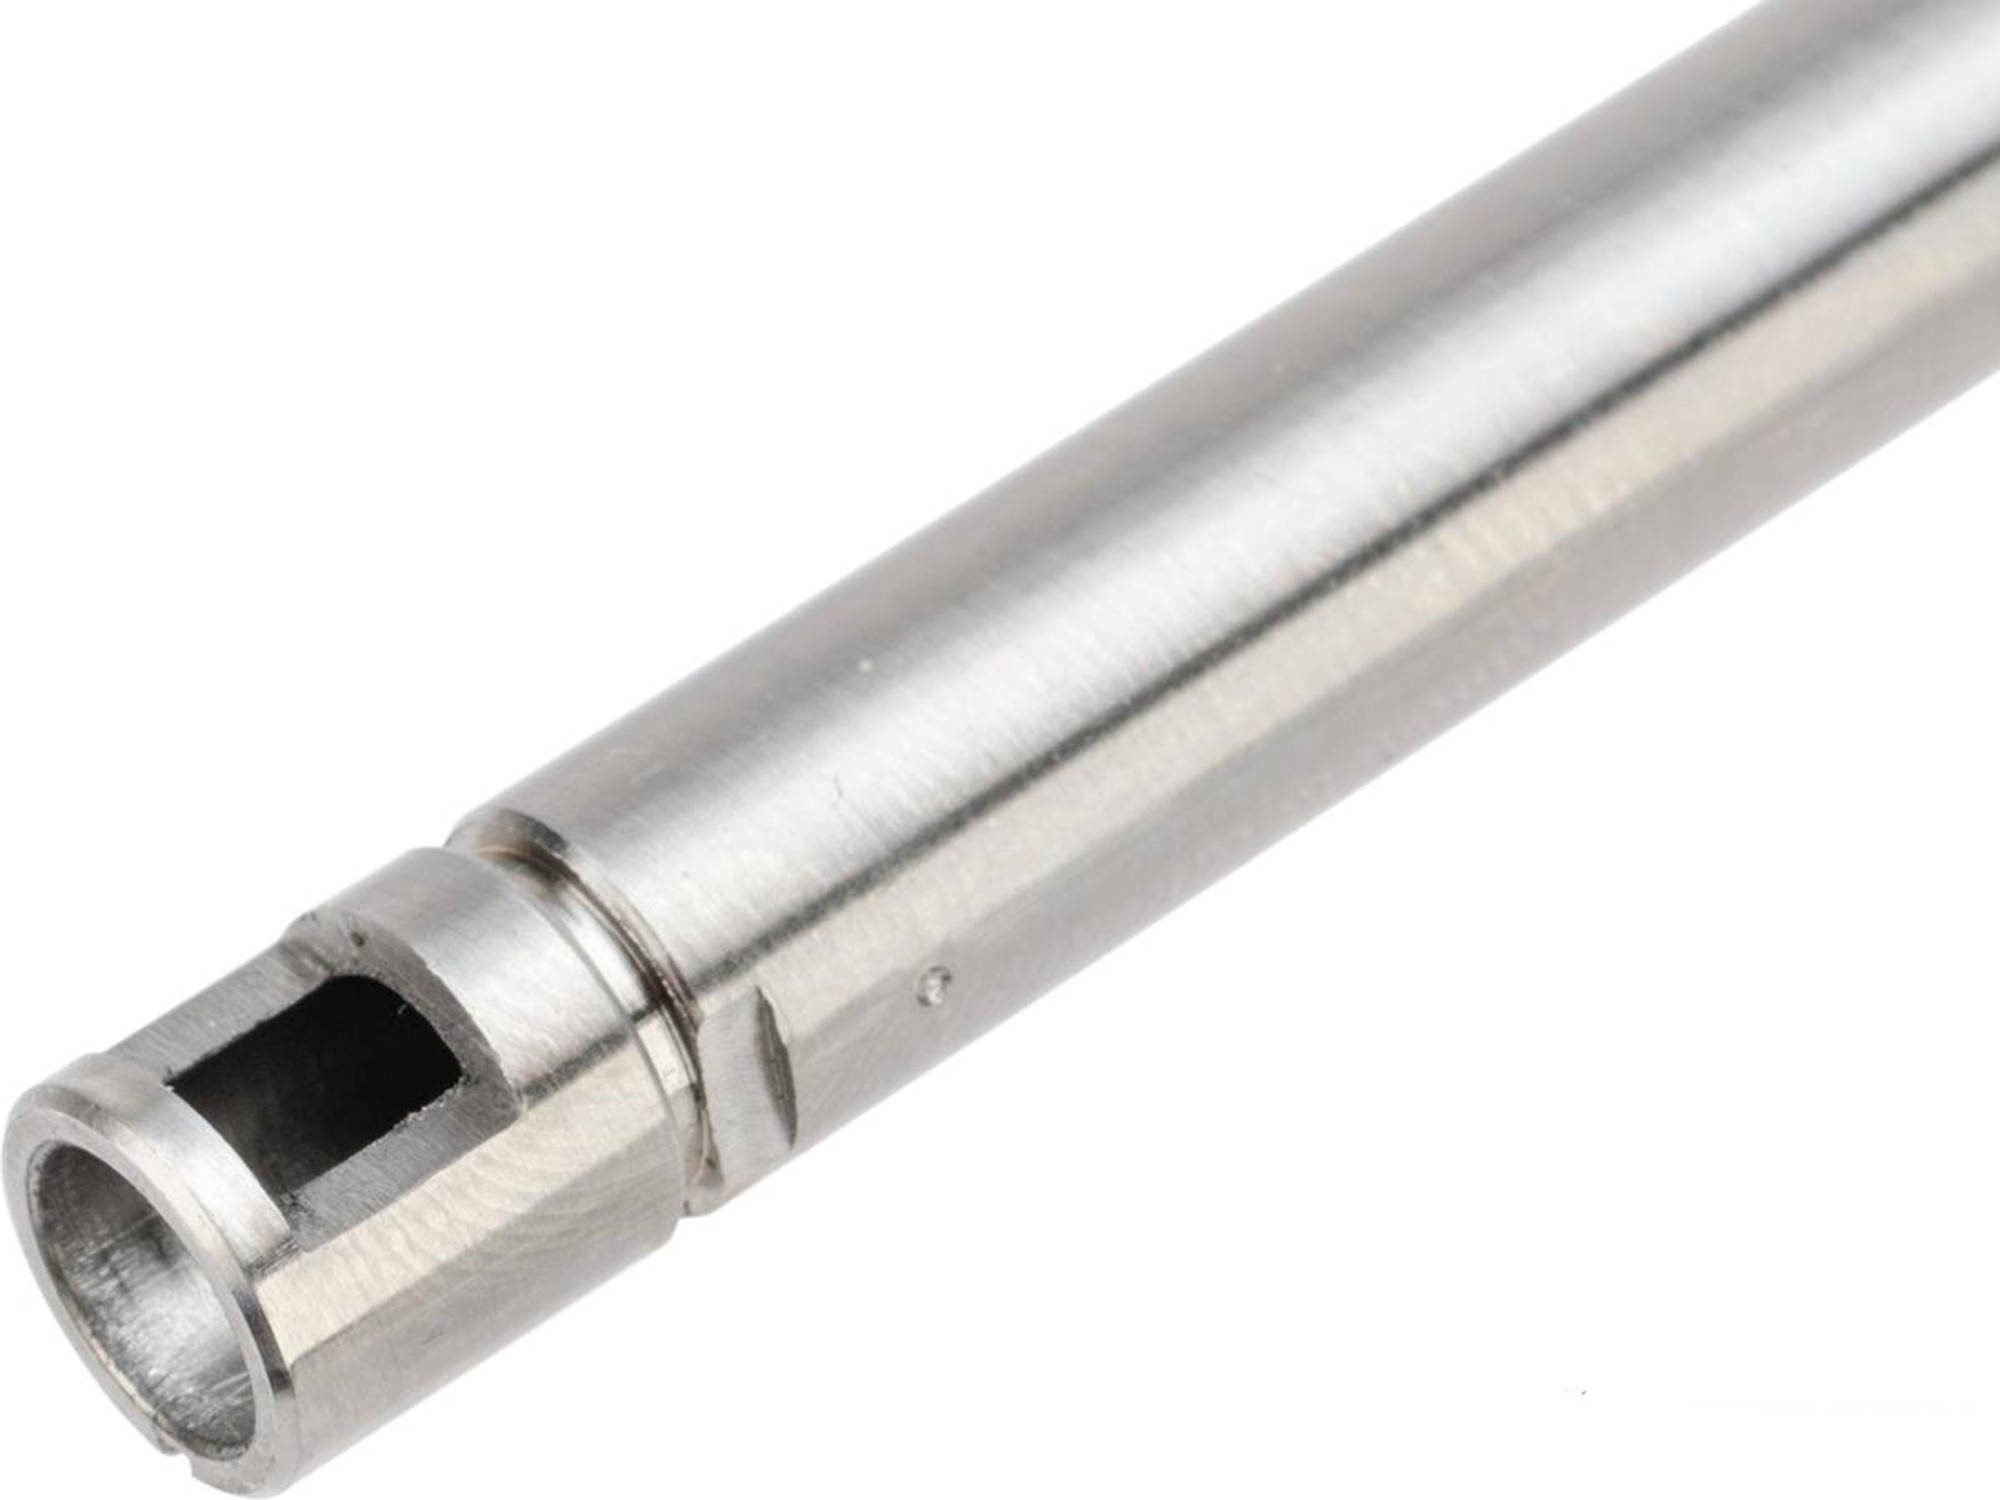 Lambda "One" Precision Stainless Steel 6.01mm Tight Bore Inner Barrel for Tokyo Marui L96 AWS Rifles (Length: 500mm)